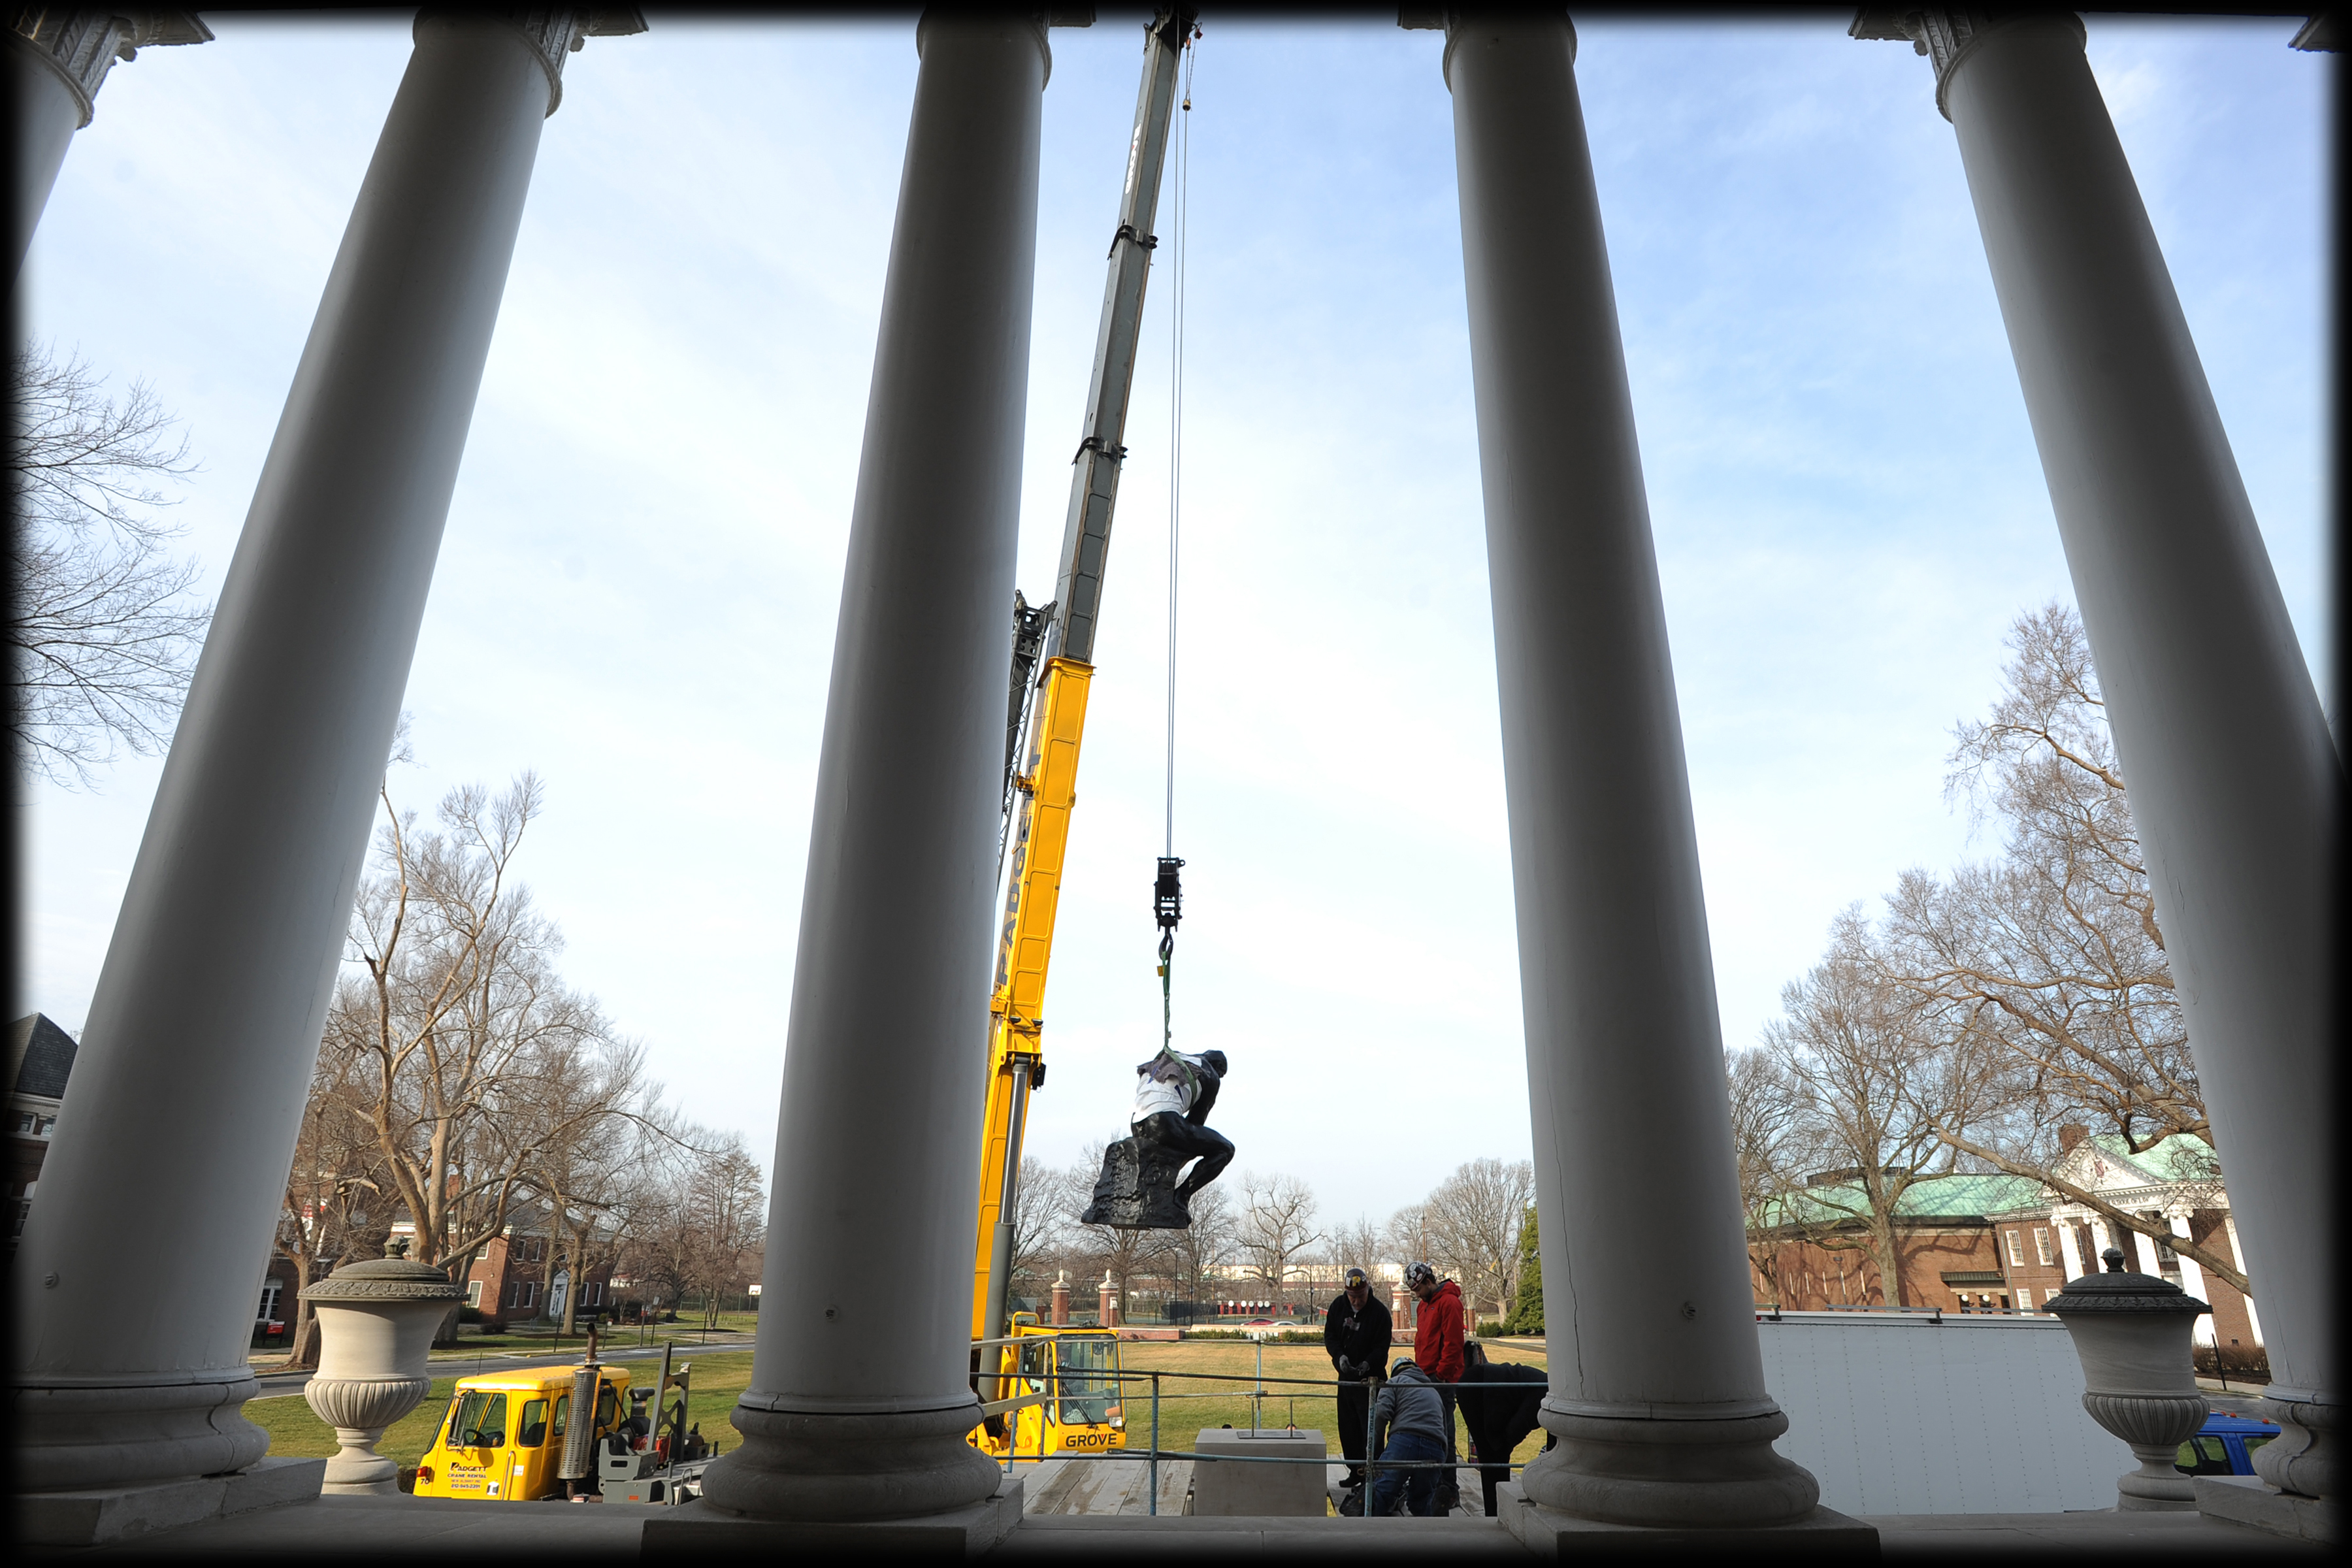 The Thinker on the steps of Grawemeyer Hall was removed via crane in 2012 for restoration efforts.